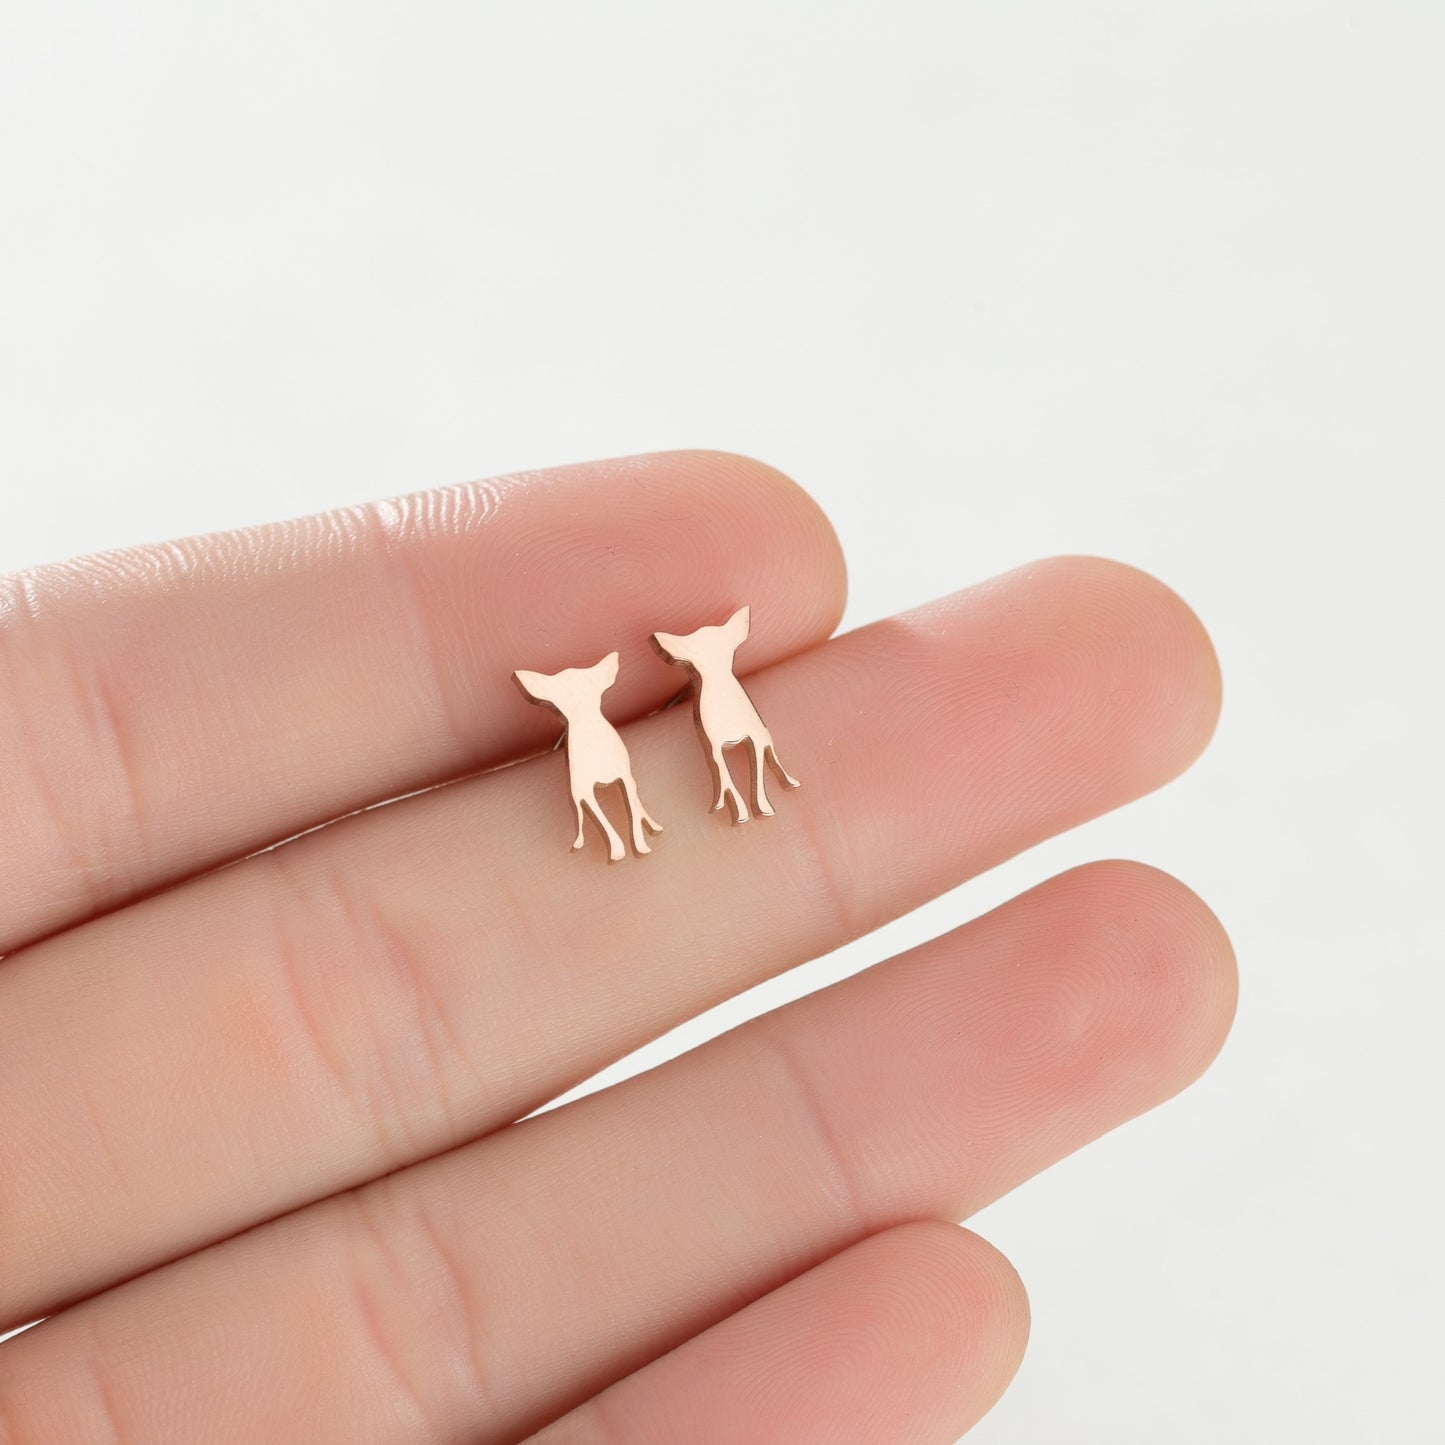 Realistic Dog Earrings (2 pairs pack) - Style's Bug Chihuahua Walking / Gold